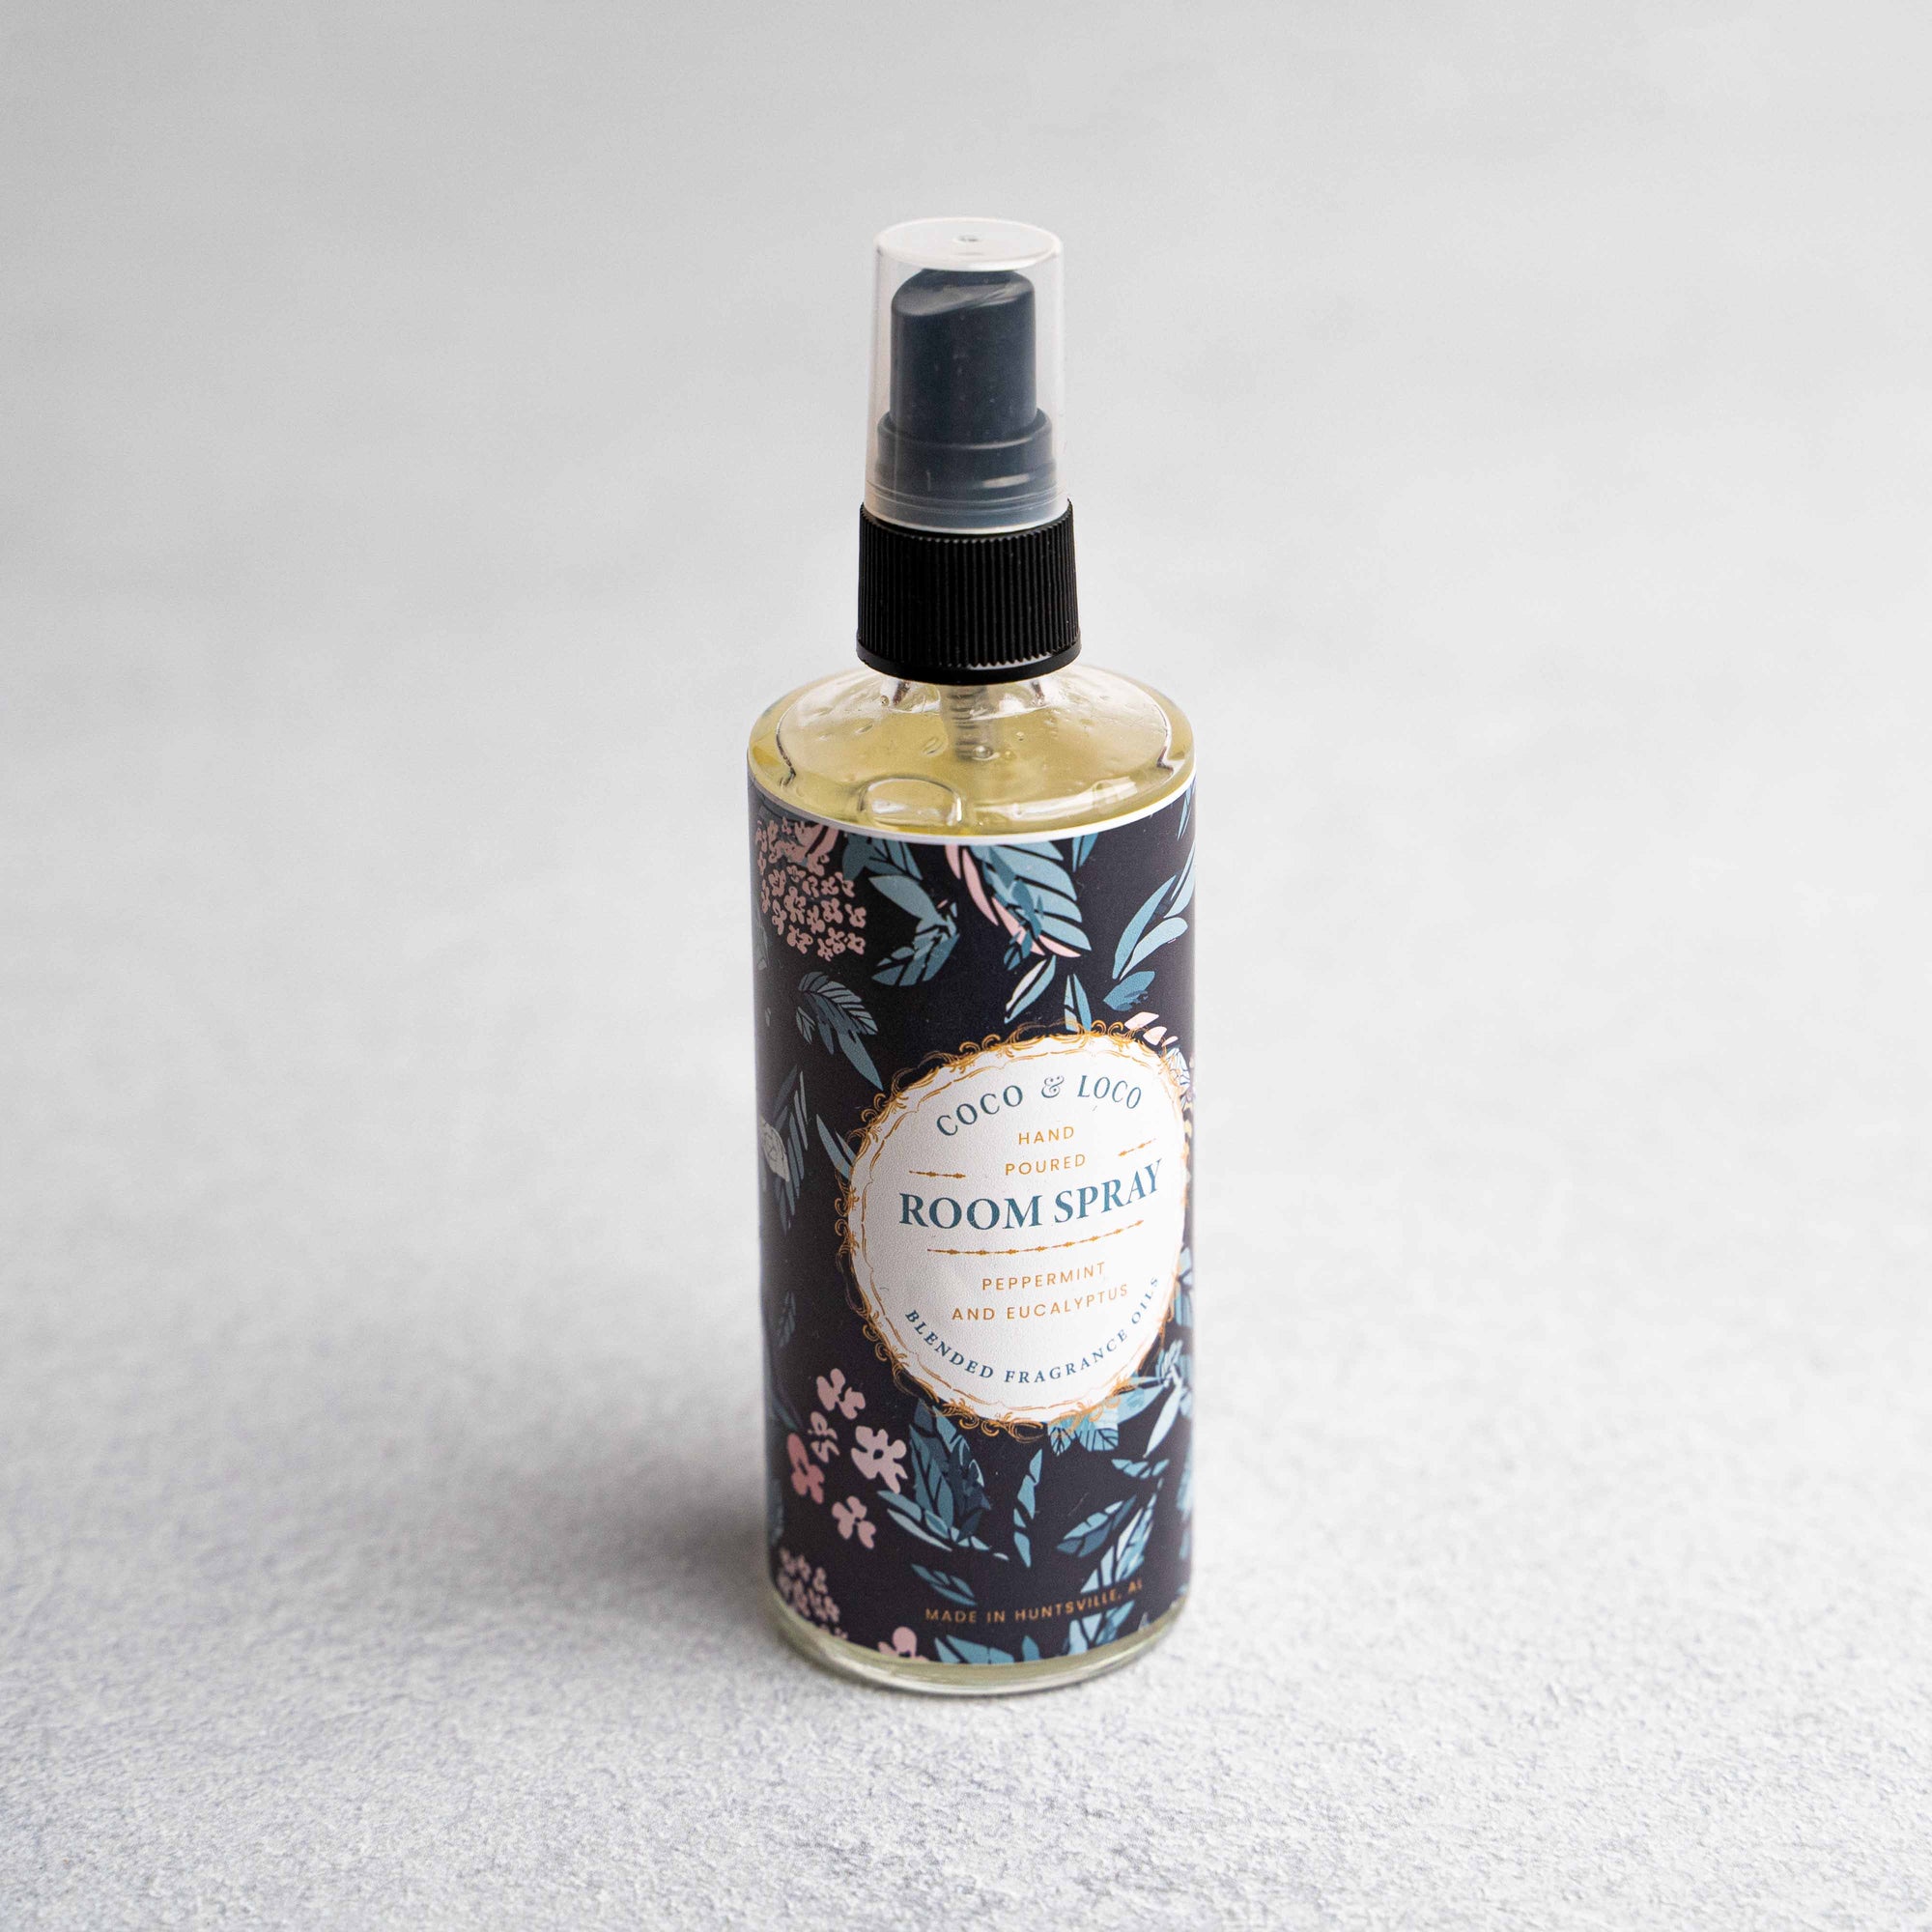 Peppermint and Eucalyptus scented room spray by Coco & Loco at Holtz Leather Co